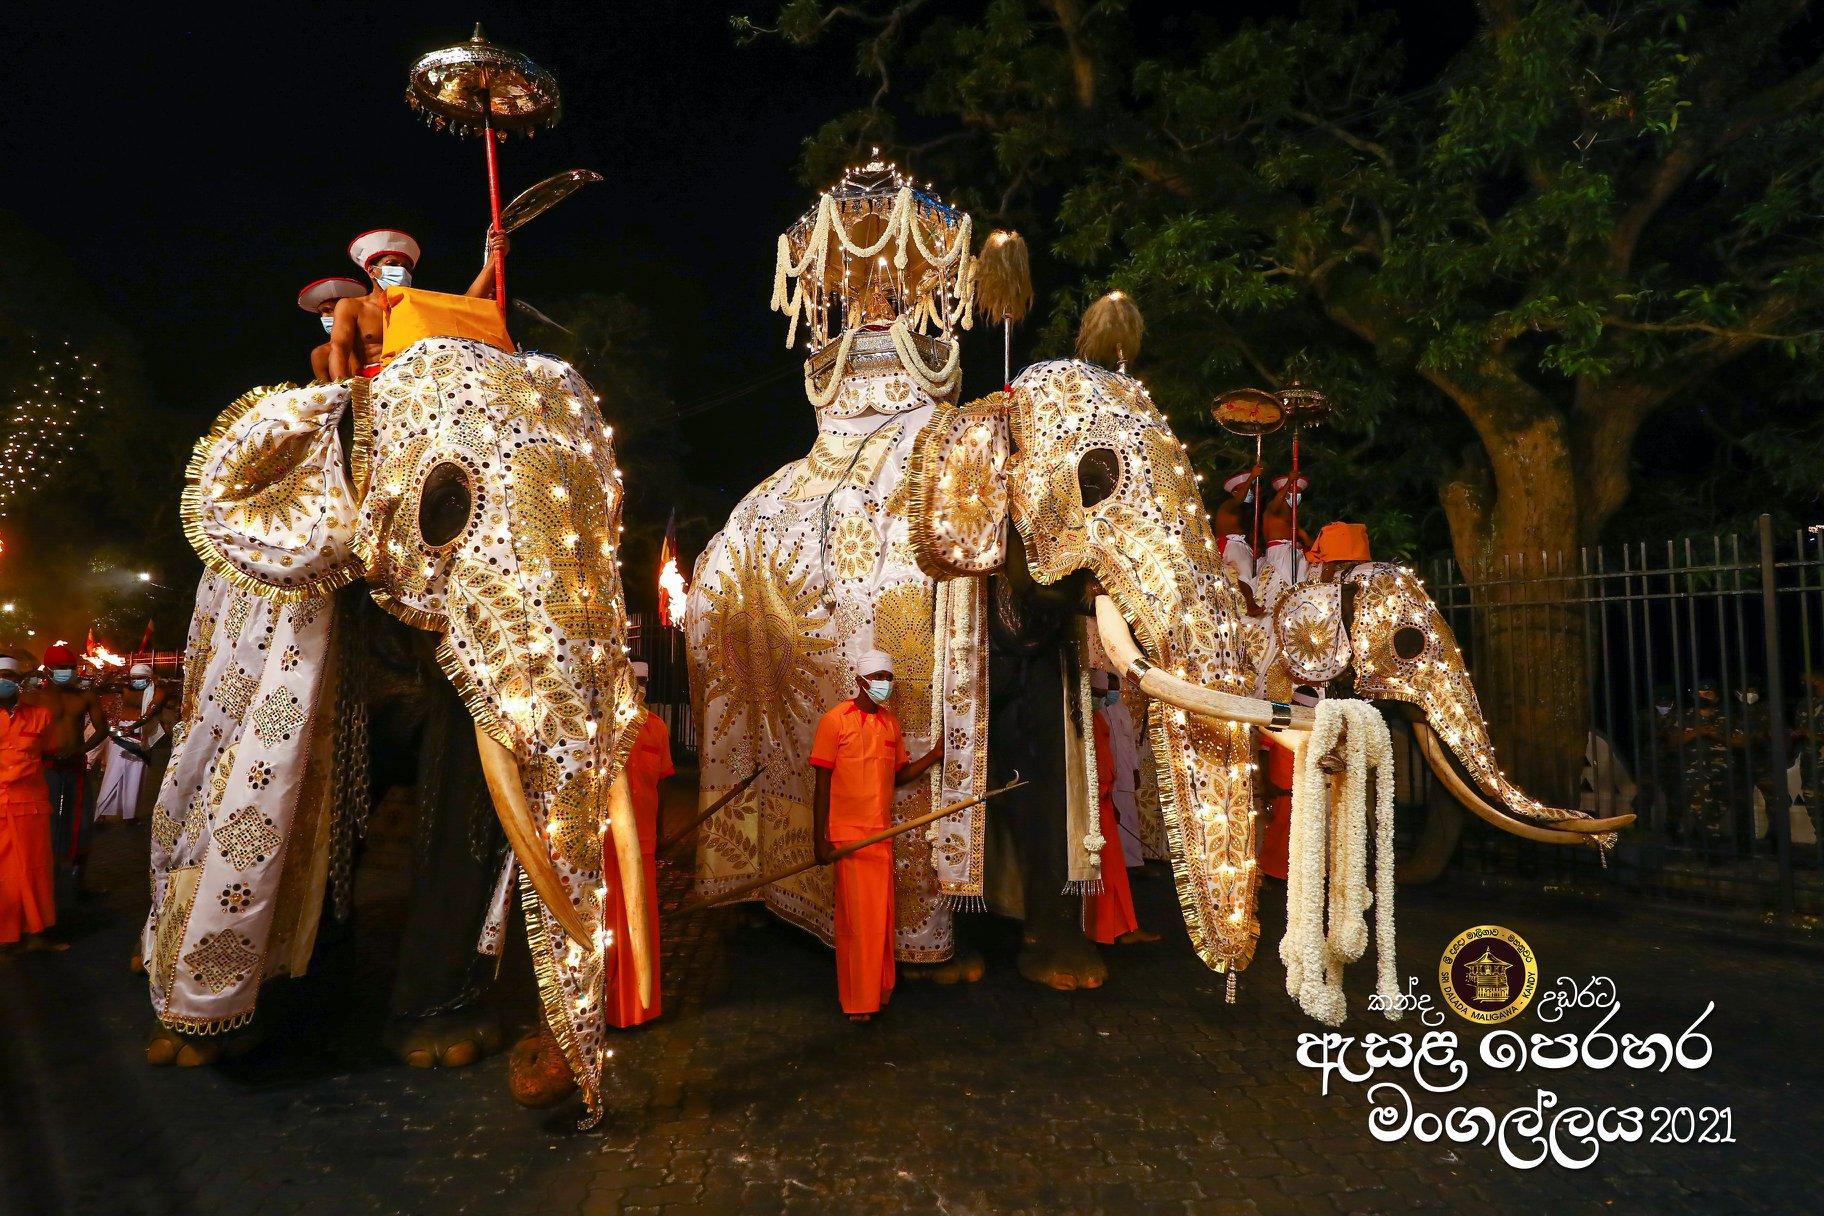 The first Kumbal Procession of the Kandy Esala Perahera Festival 2021